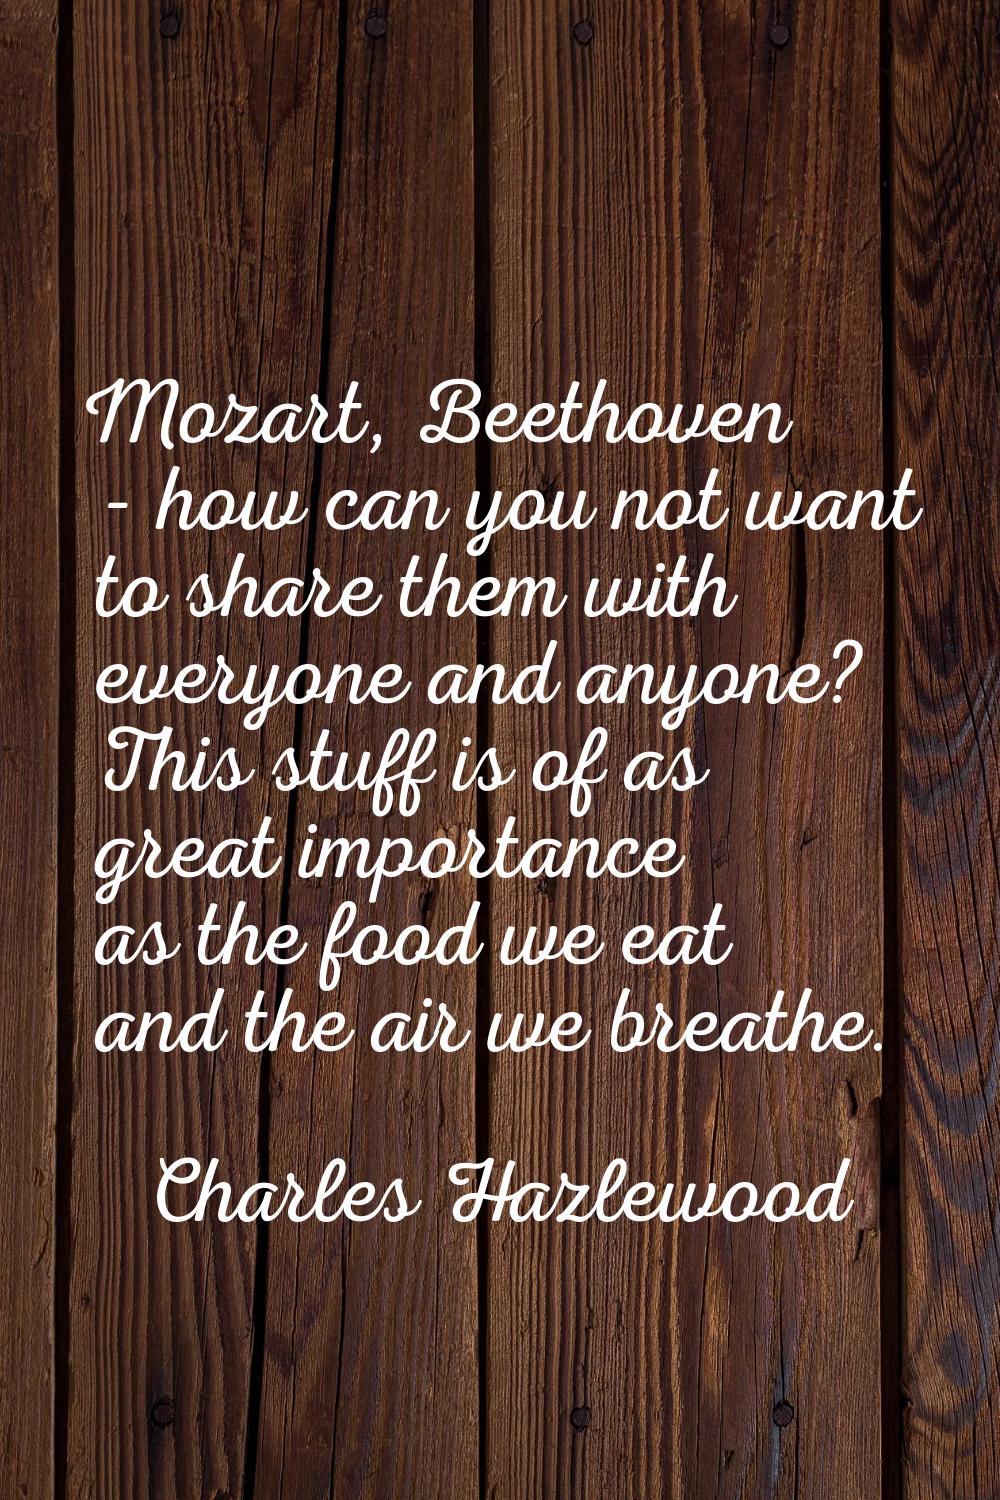 Mozart, Beethoven - how can you not want to share them with everyone and anyone? This stuff is of a